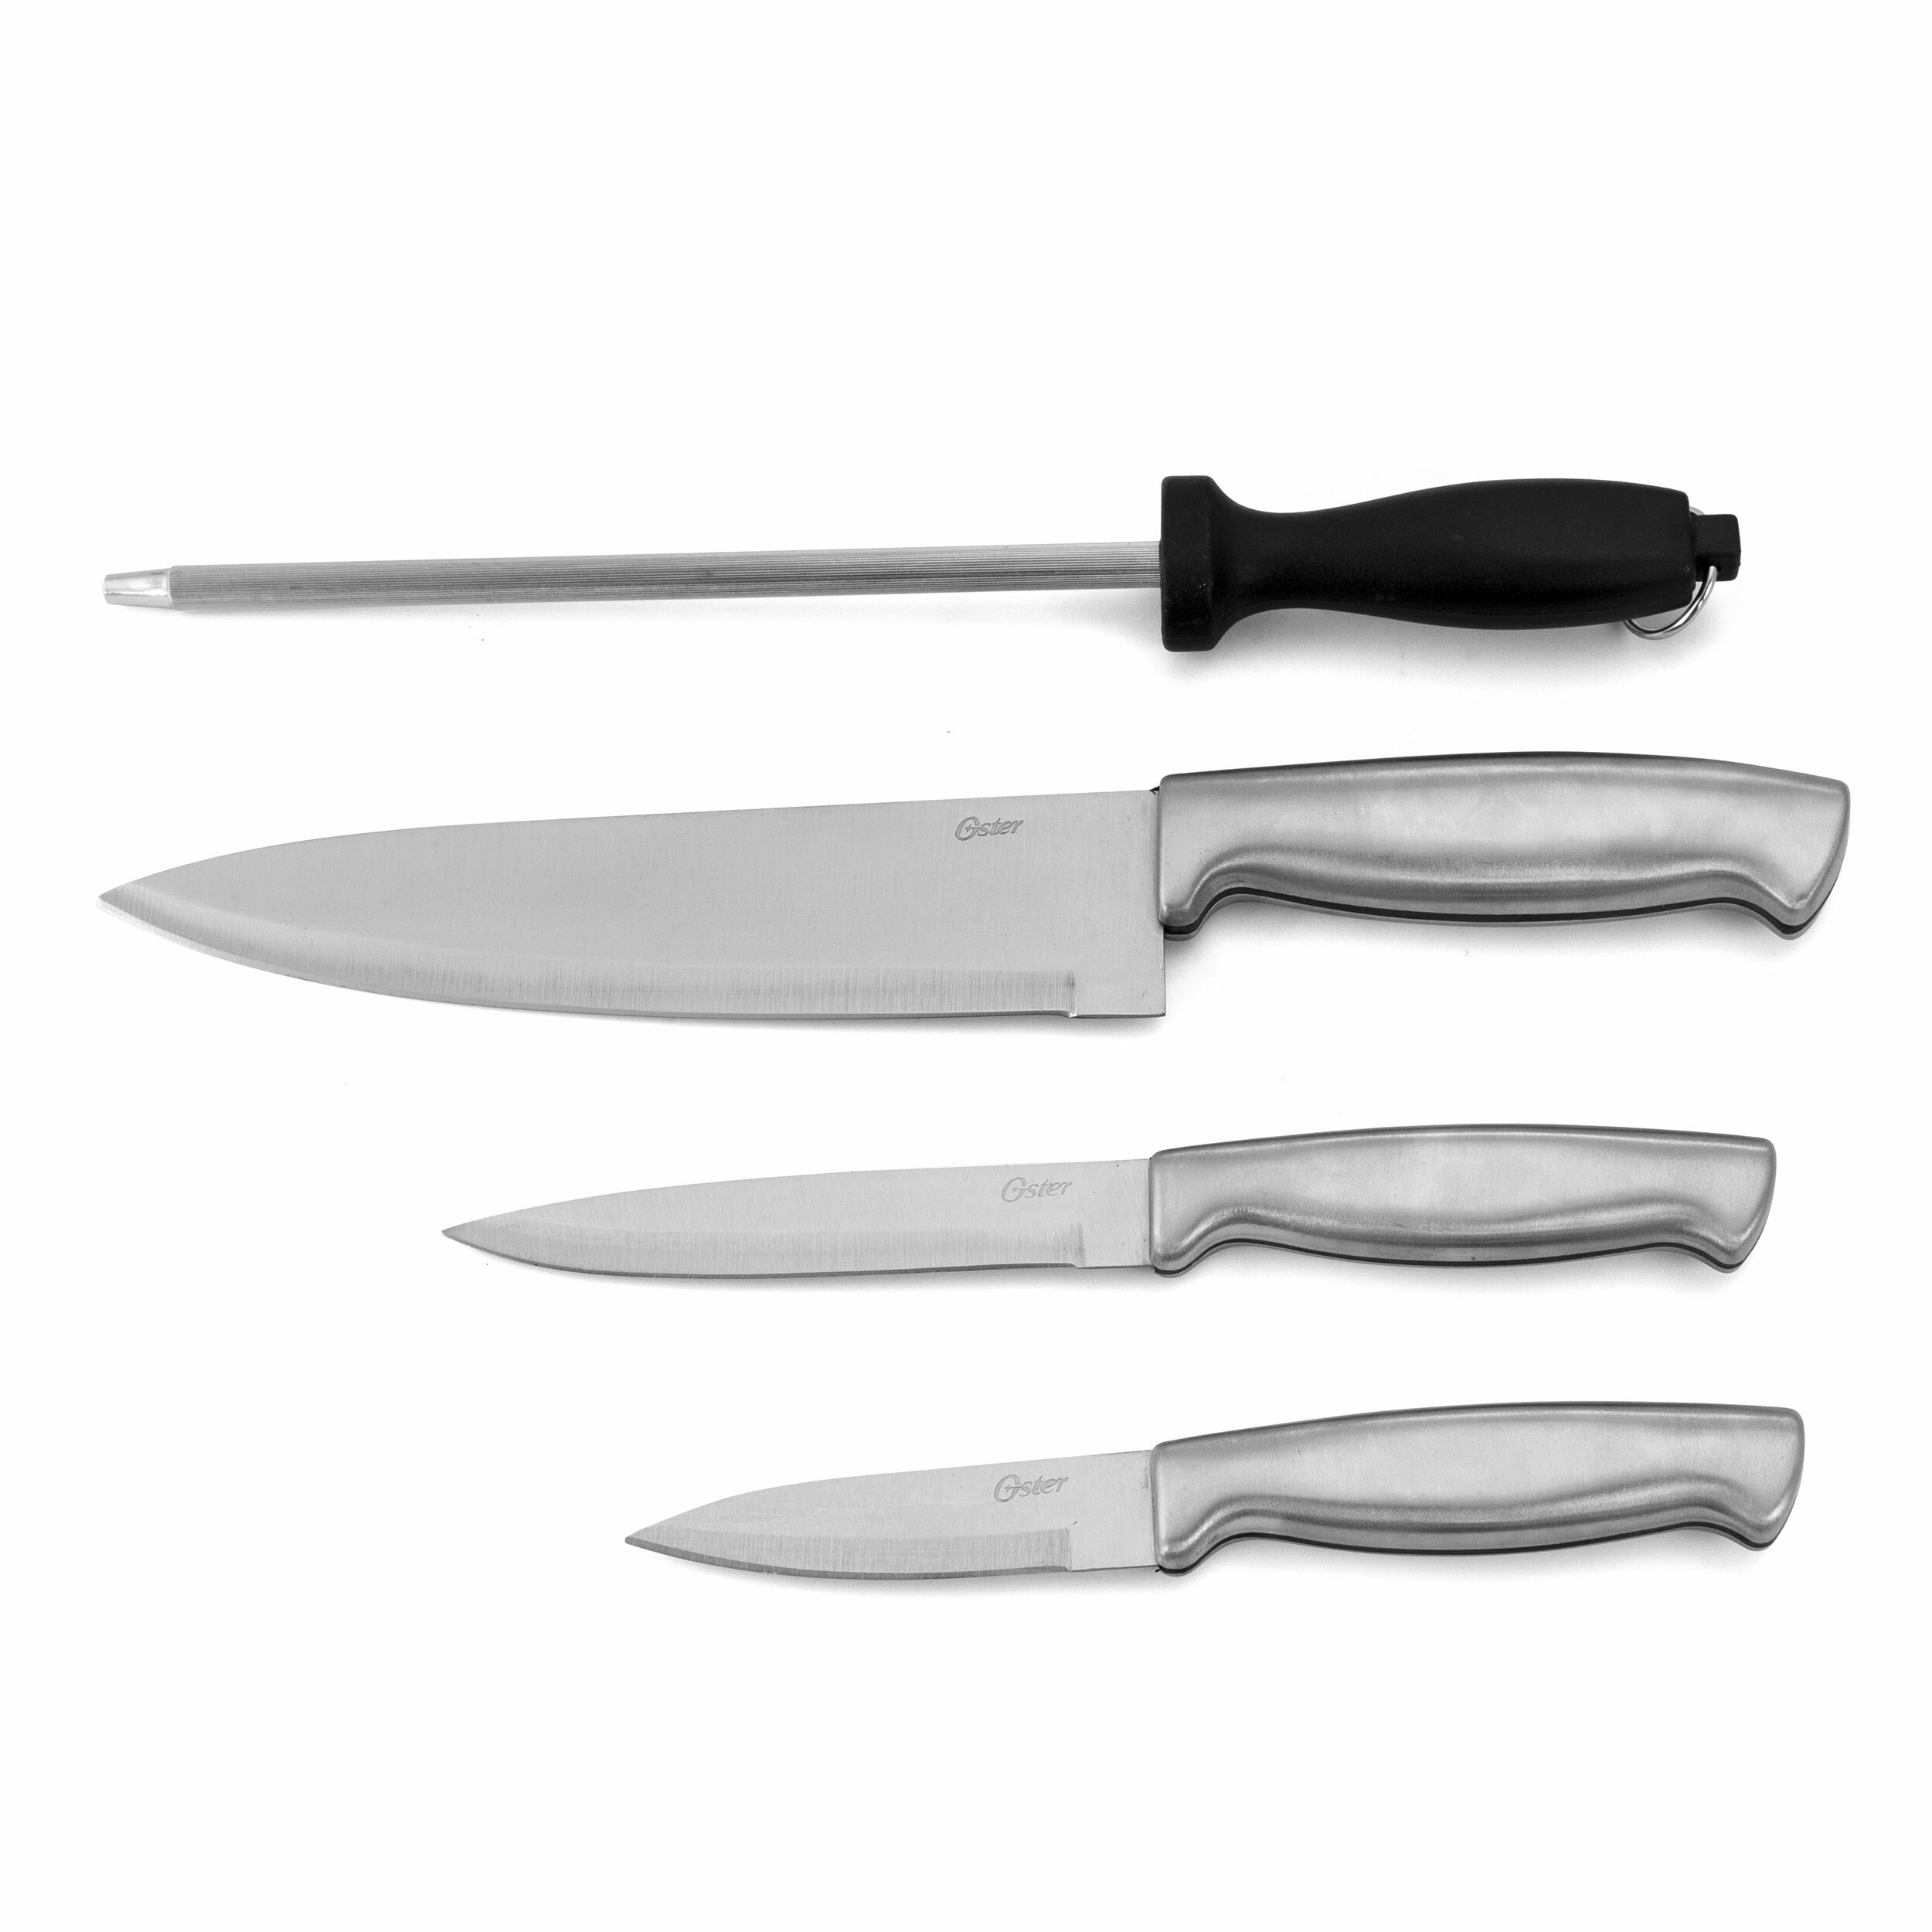 NEW Ceramic Knives With Covers 4 Pcs Quality Kitchen Knife Set with Stain  Resistant 6 inch Chef Knife, 5 inch Steak Knife, 4 inch Fruit Knife, Peeler